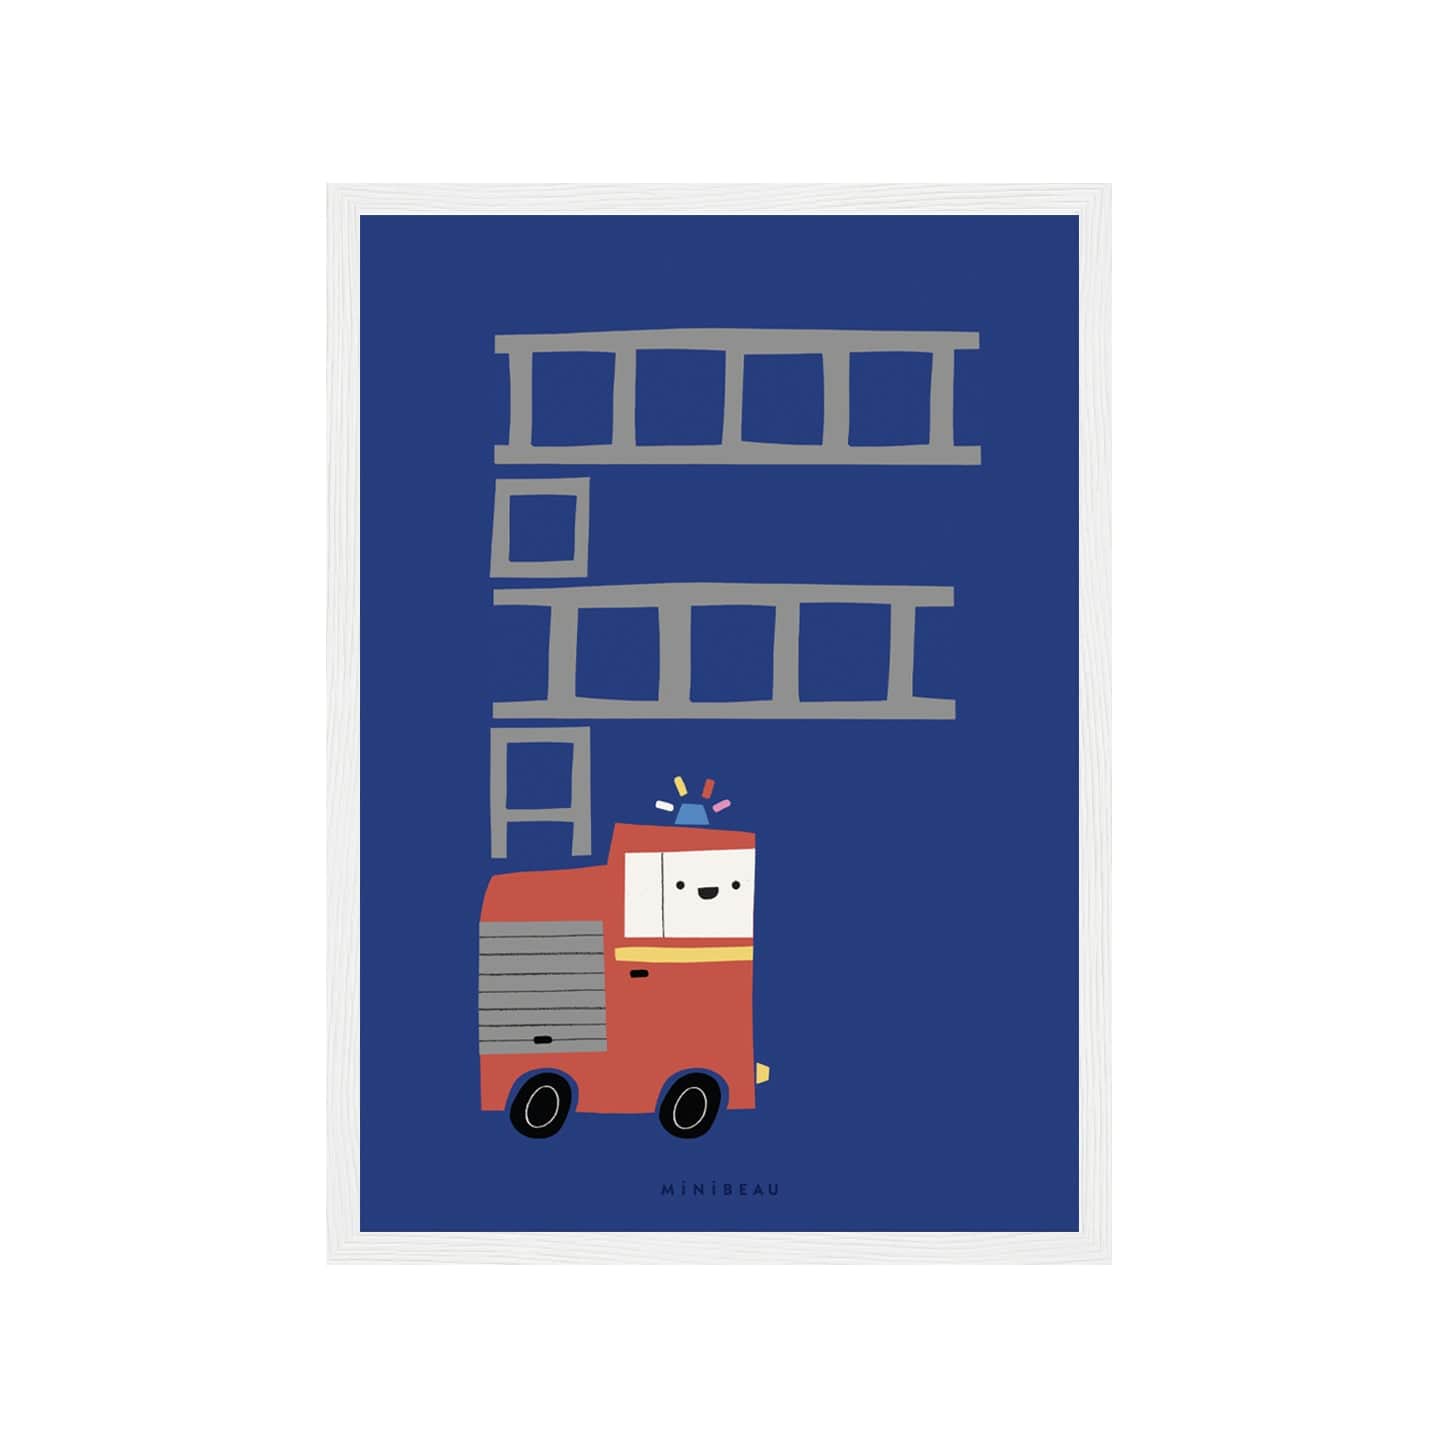 Art print in white frame. Our Happy Alphabet 'F' Art Print shows a red fire engine with its ladder raised in the shape of the letter F, with its blue light flashing on a dark blue background.